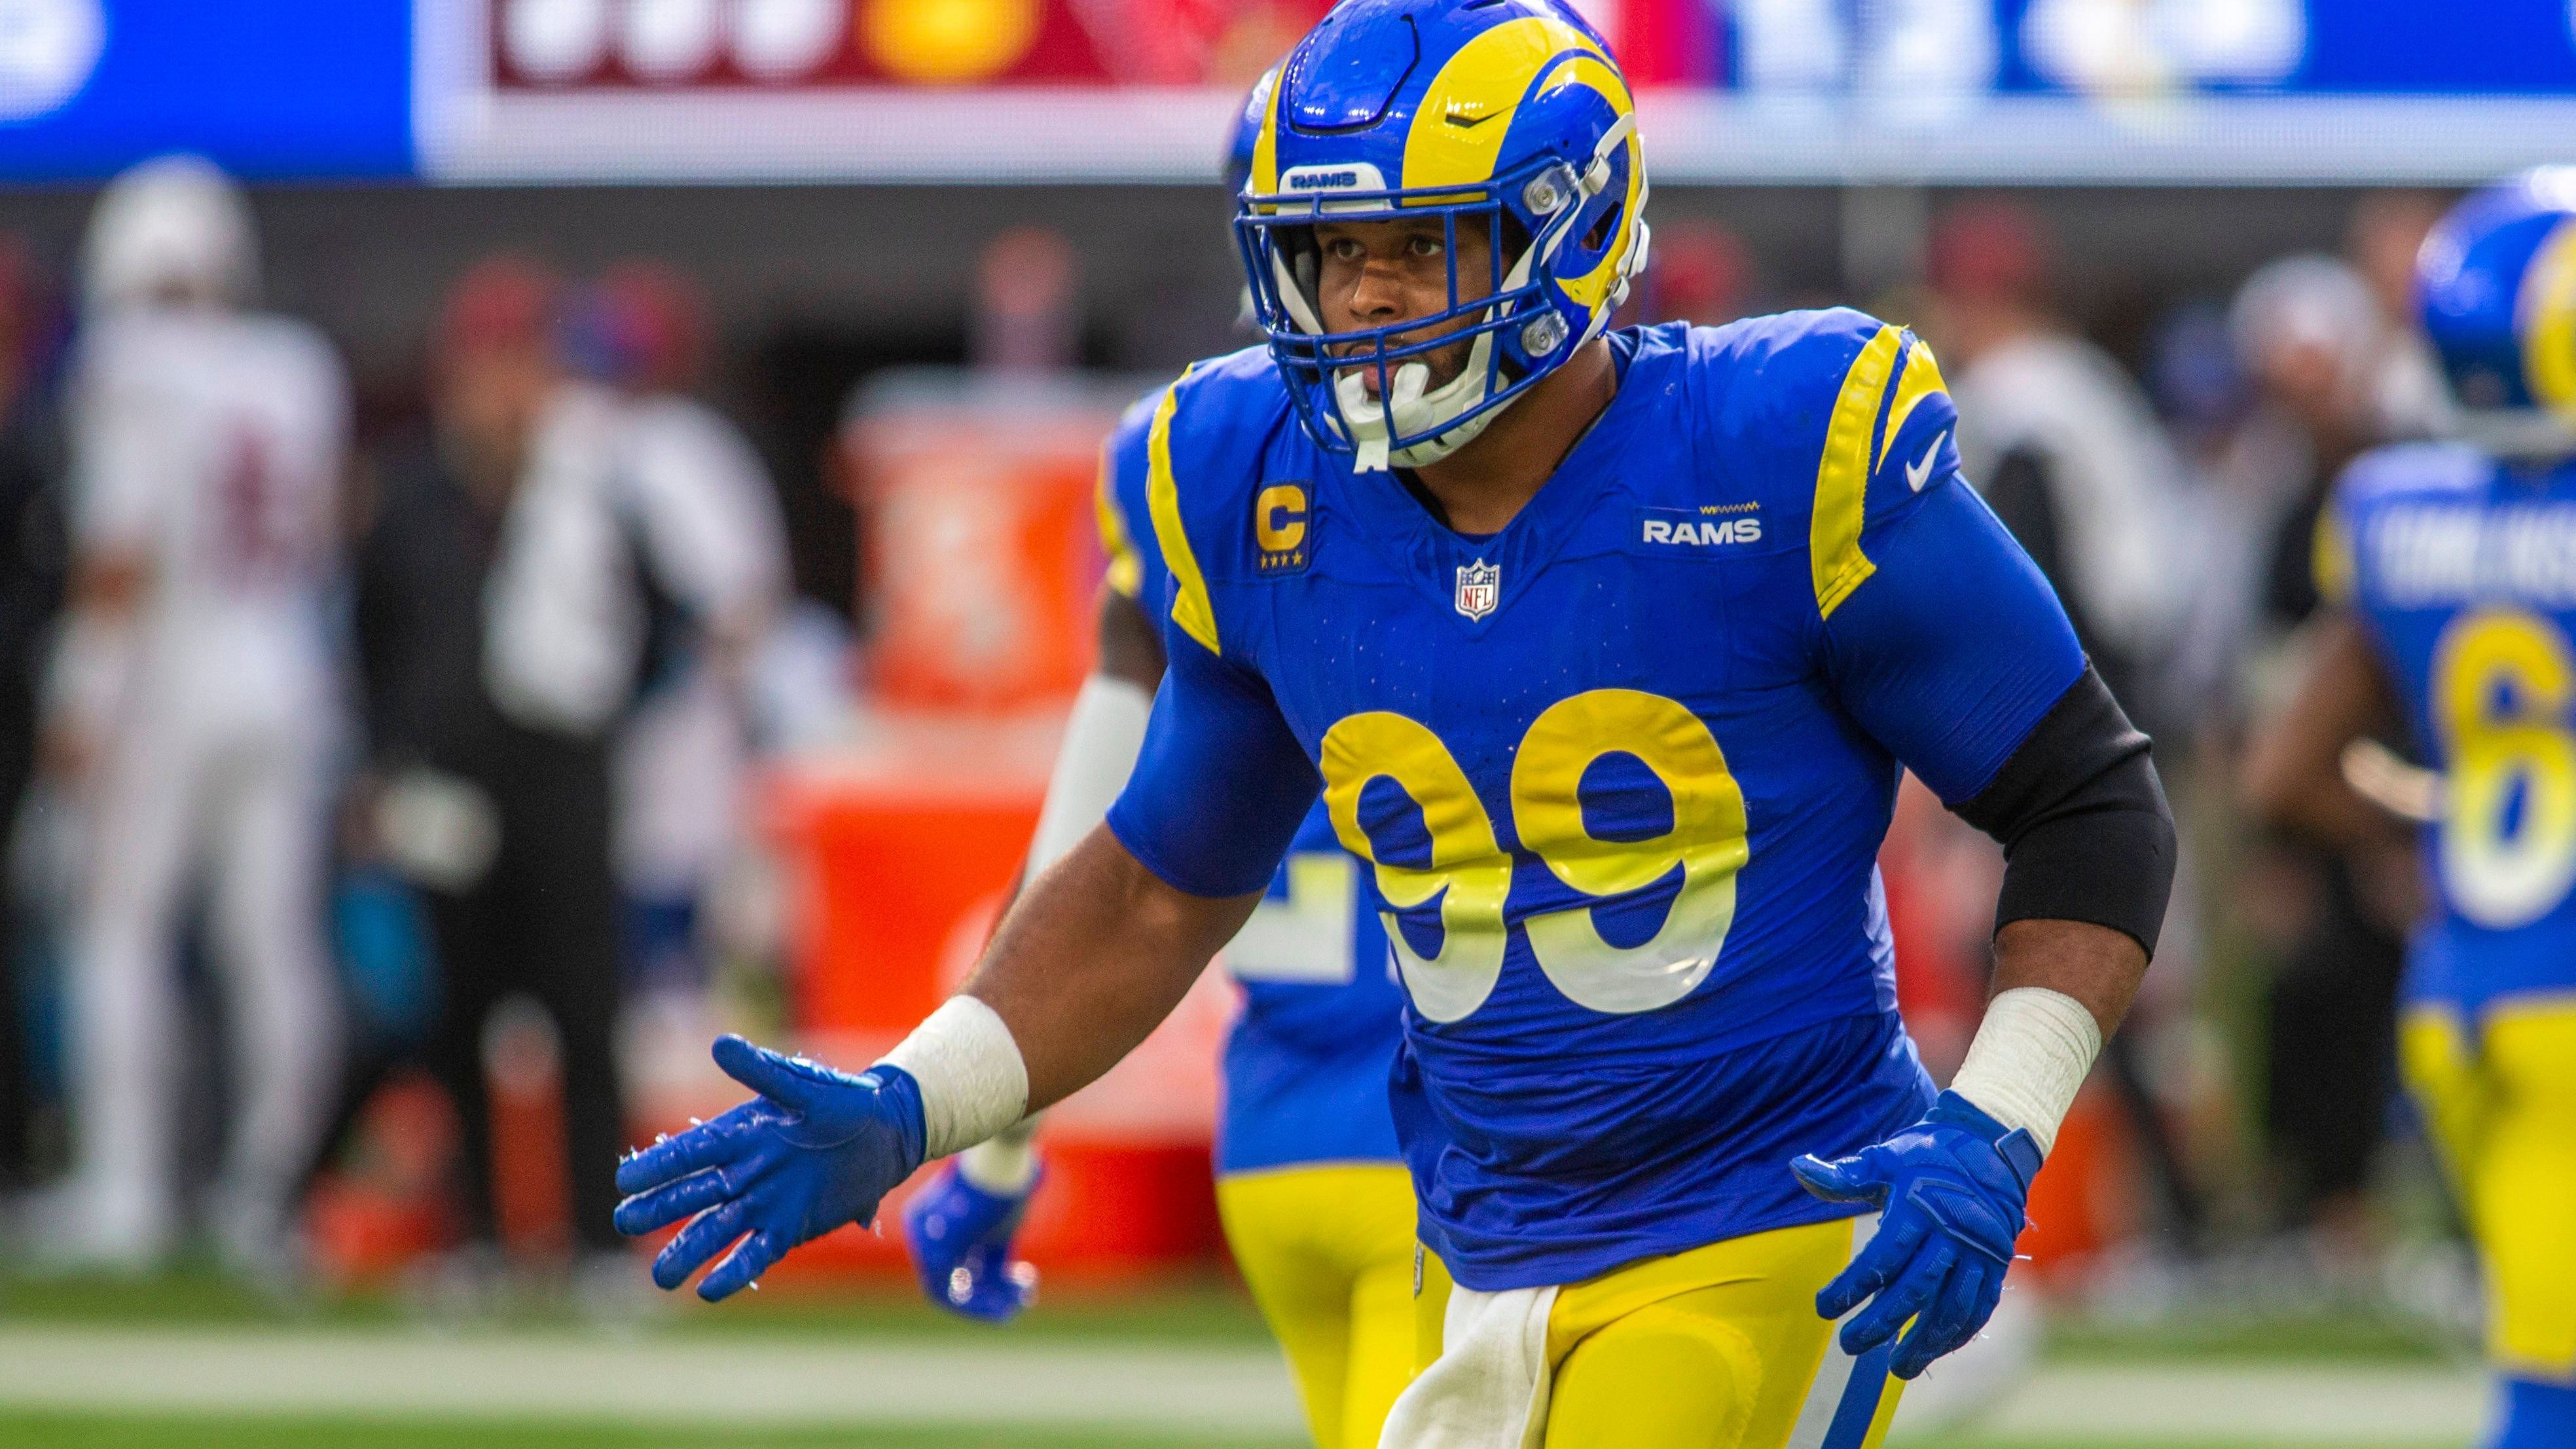 <strong>99: Aaron Donald<br></strong>Team: St. Louis / Los Angeles Rams<br>Position: Defensive End<br>Erfolge: Super-Bowl-Champion 2022, dreimaliger NFL Defensive Player of the Year, siebenmaliger First Team All-Pro, neunmaliger Pro Bowler<br>Honorable Mentions: J.J. Watt, Warren Sapp